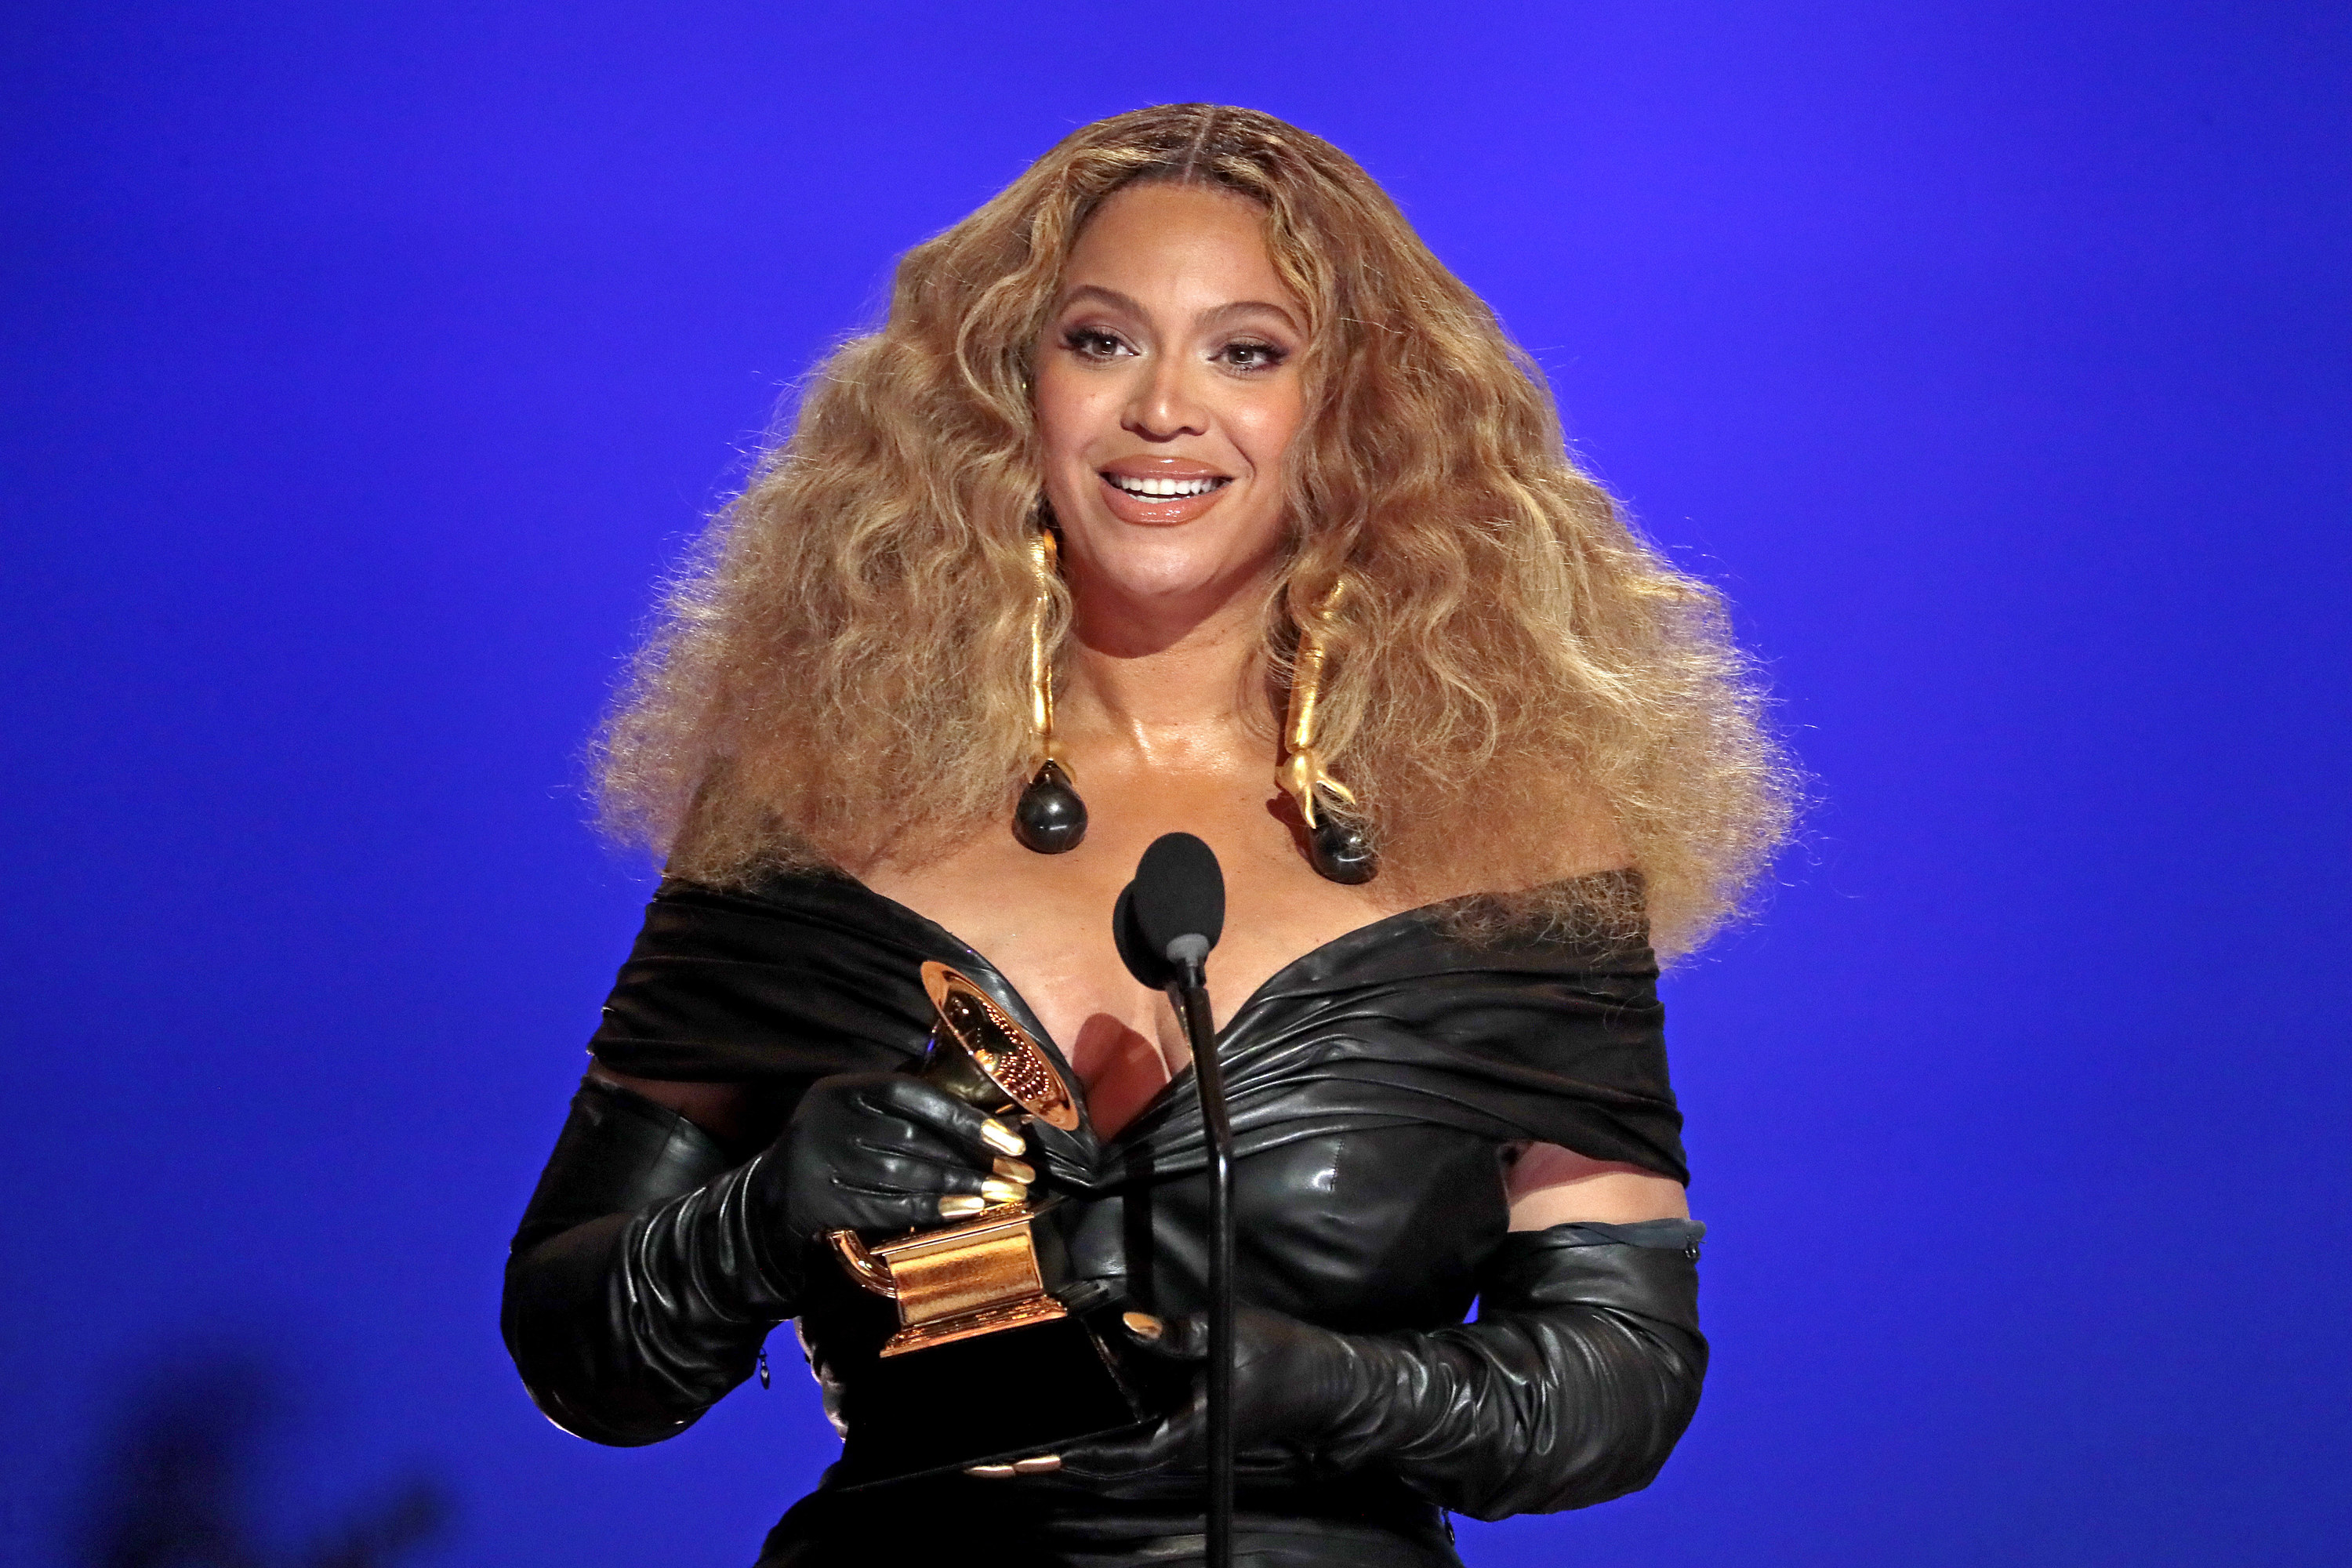 Beyonce is holding a Grammy Award